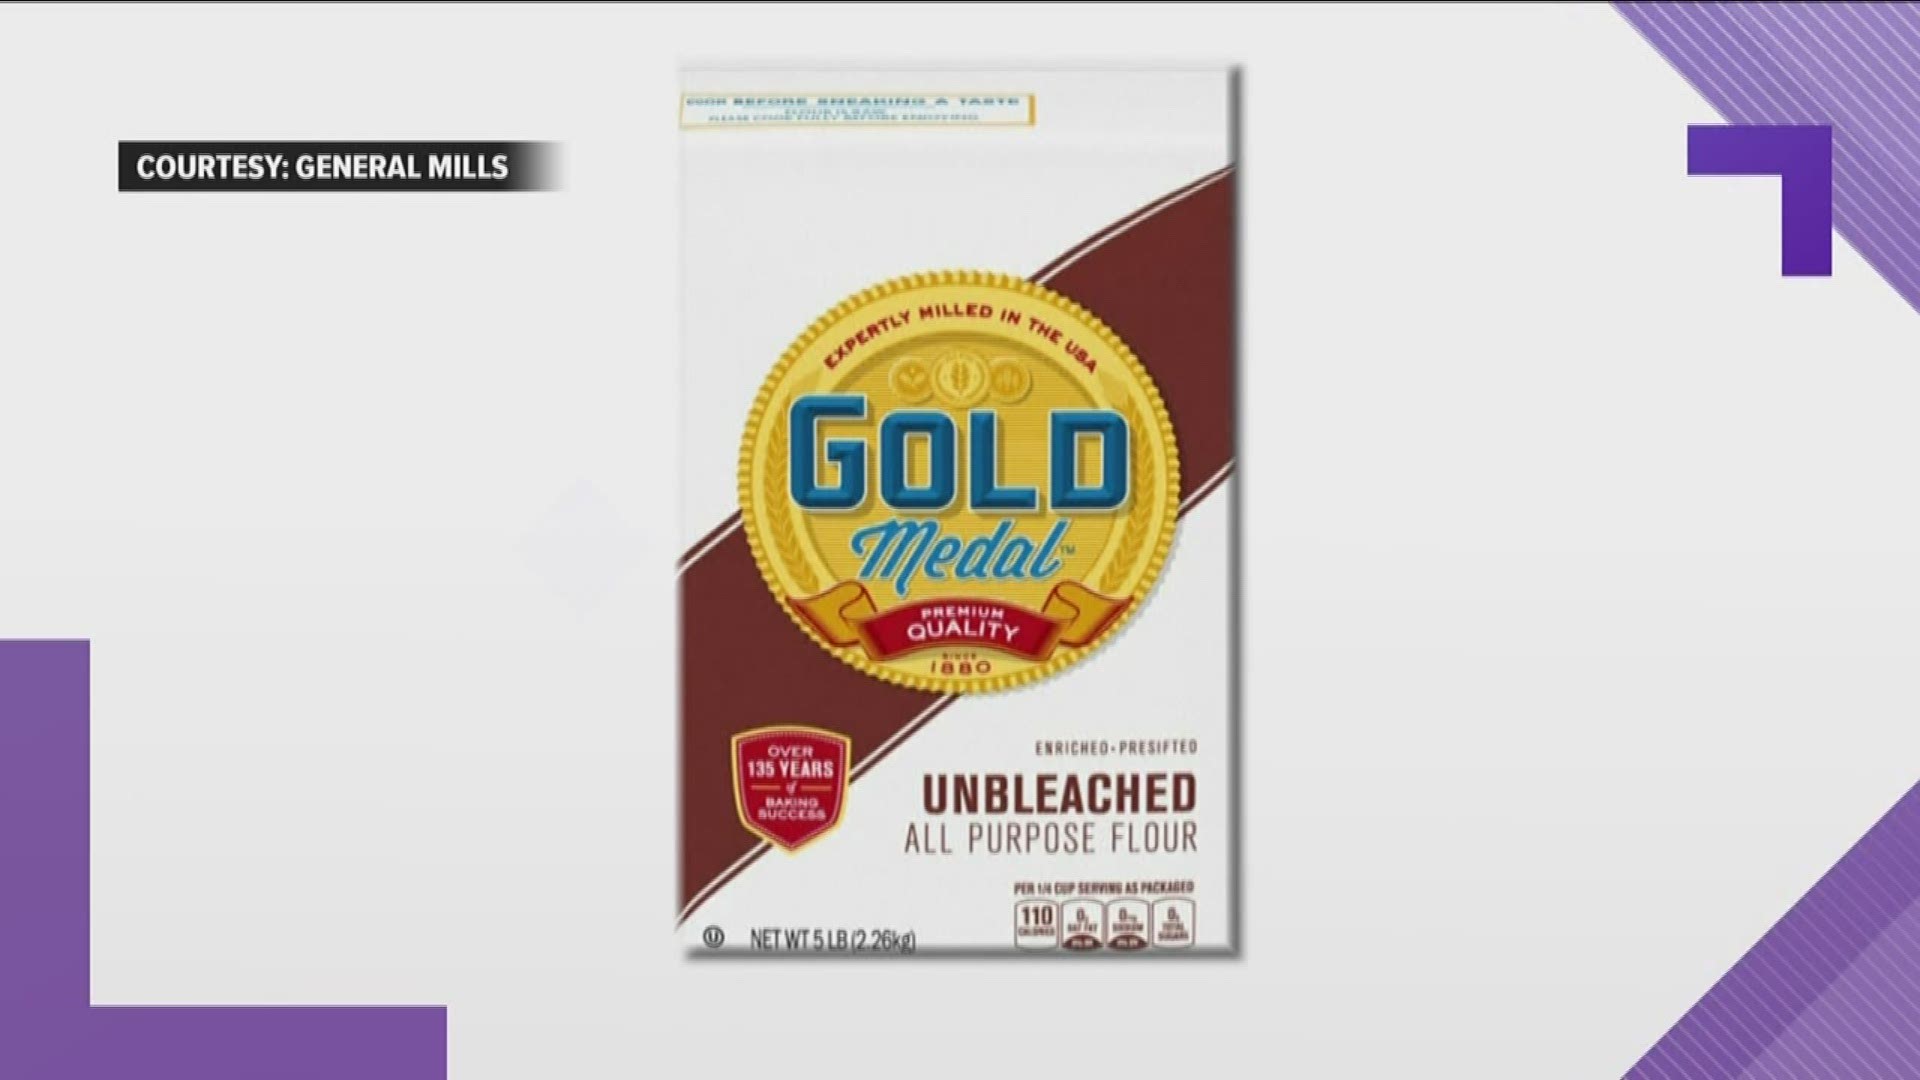 The recall involves 5-pound bags of Gold Medal Unbleached Flour with a specific 'best by' date.